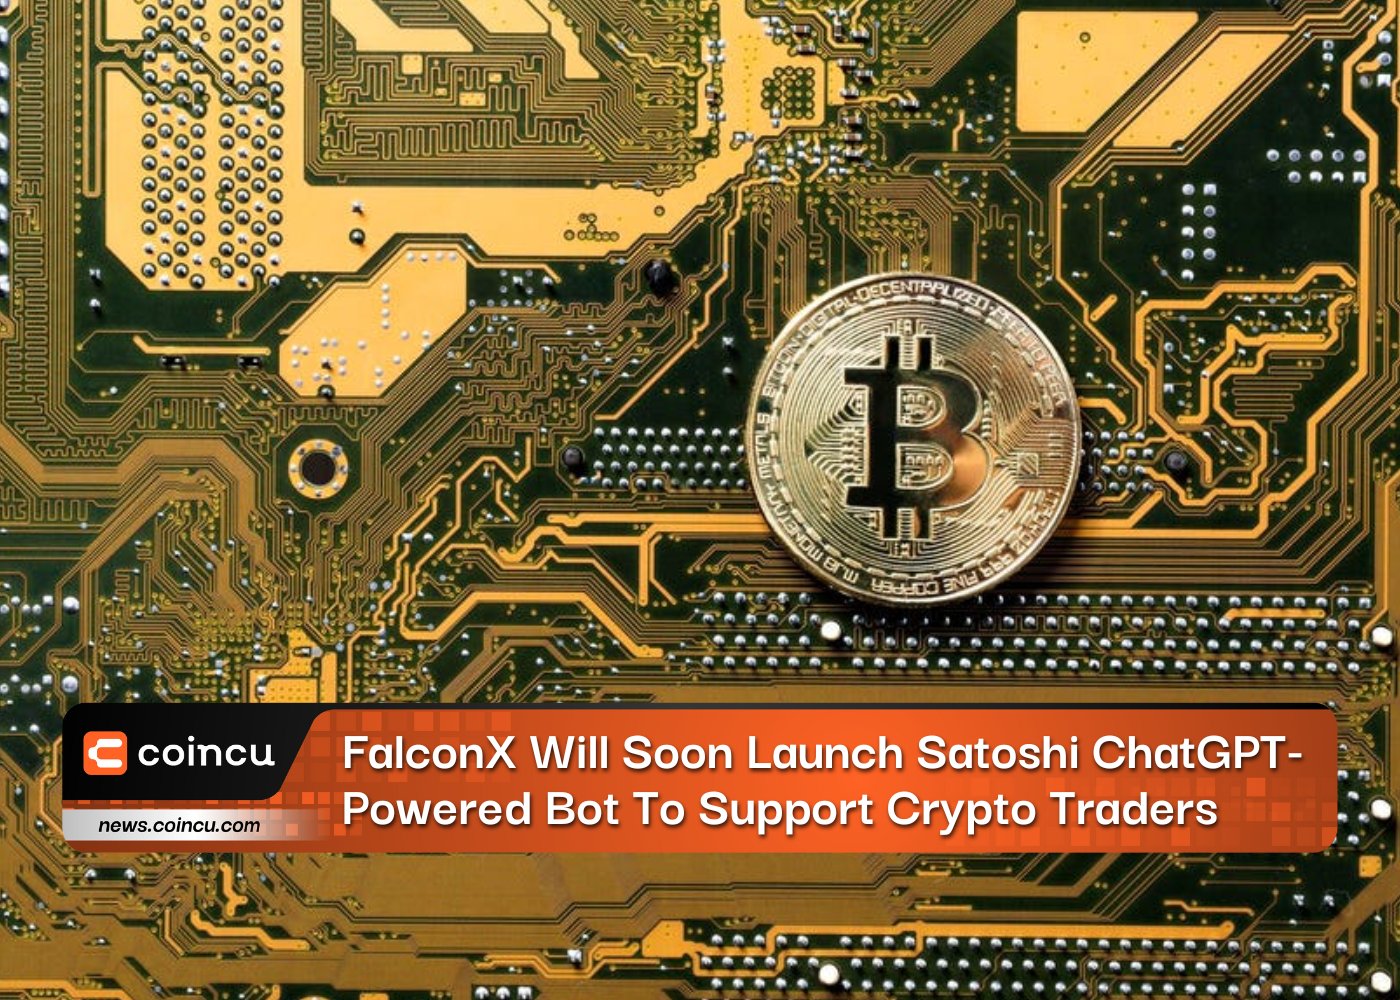 FalconX Will Soon Launch Satoshi ChatGPT-Powered Bot To Support Crypto Traders